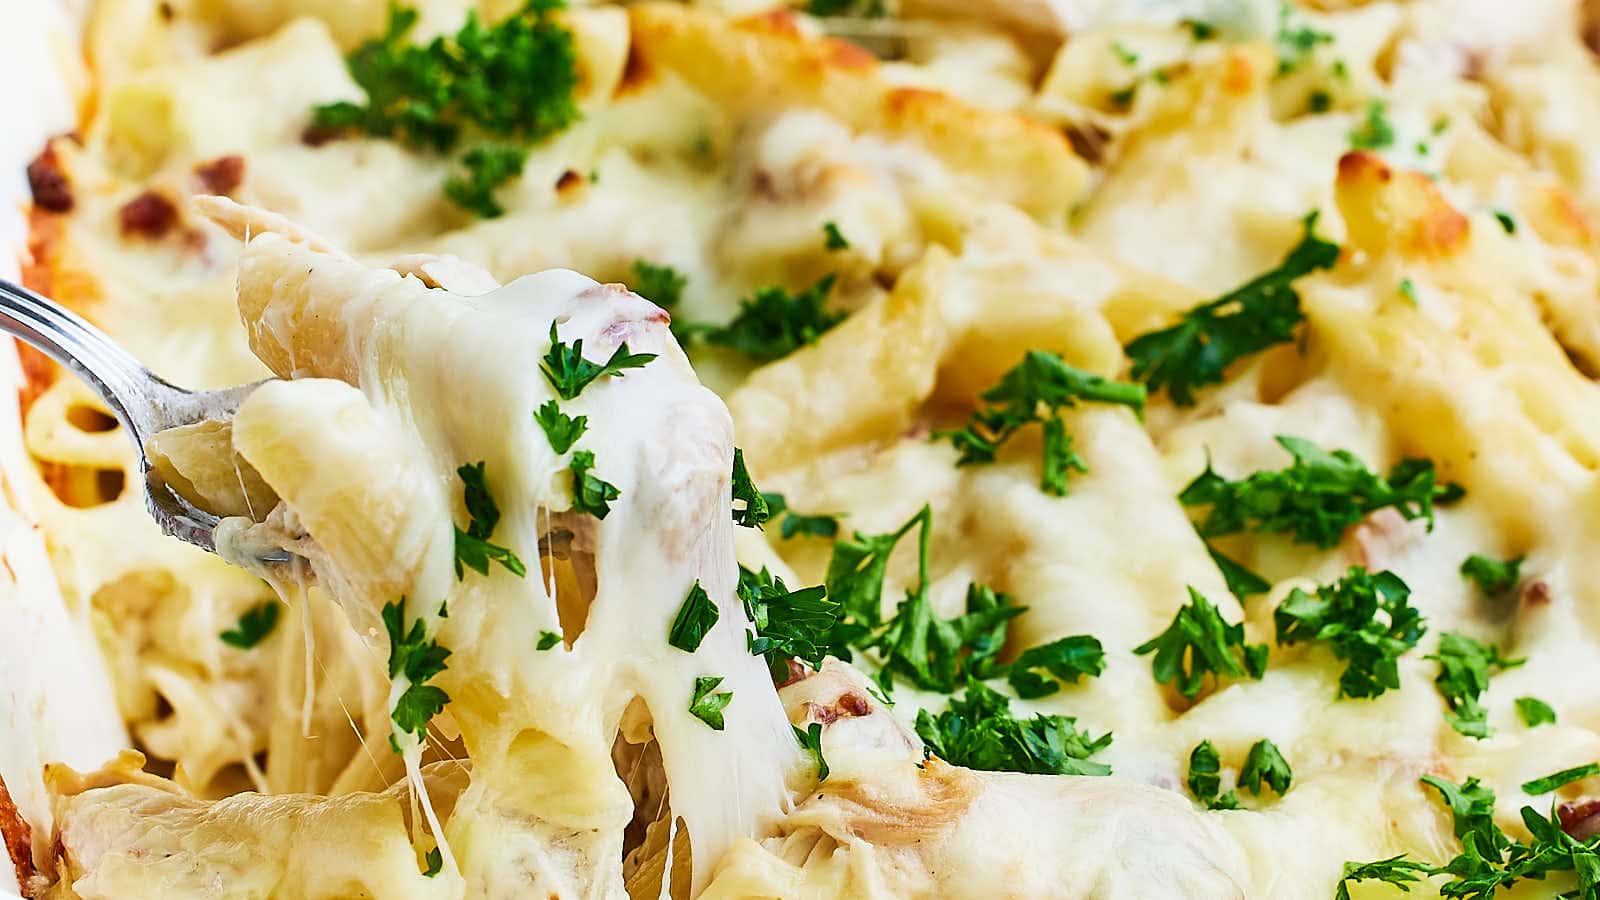 Chicken Bacon Ranch Casserole recipe by Cheerful Cook.